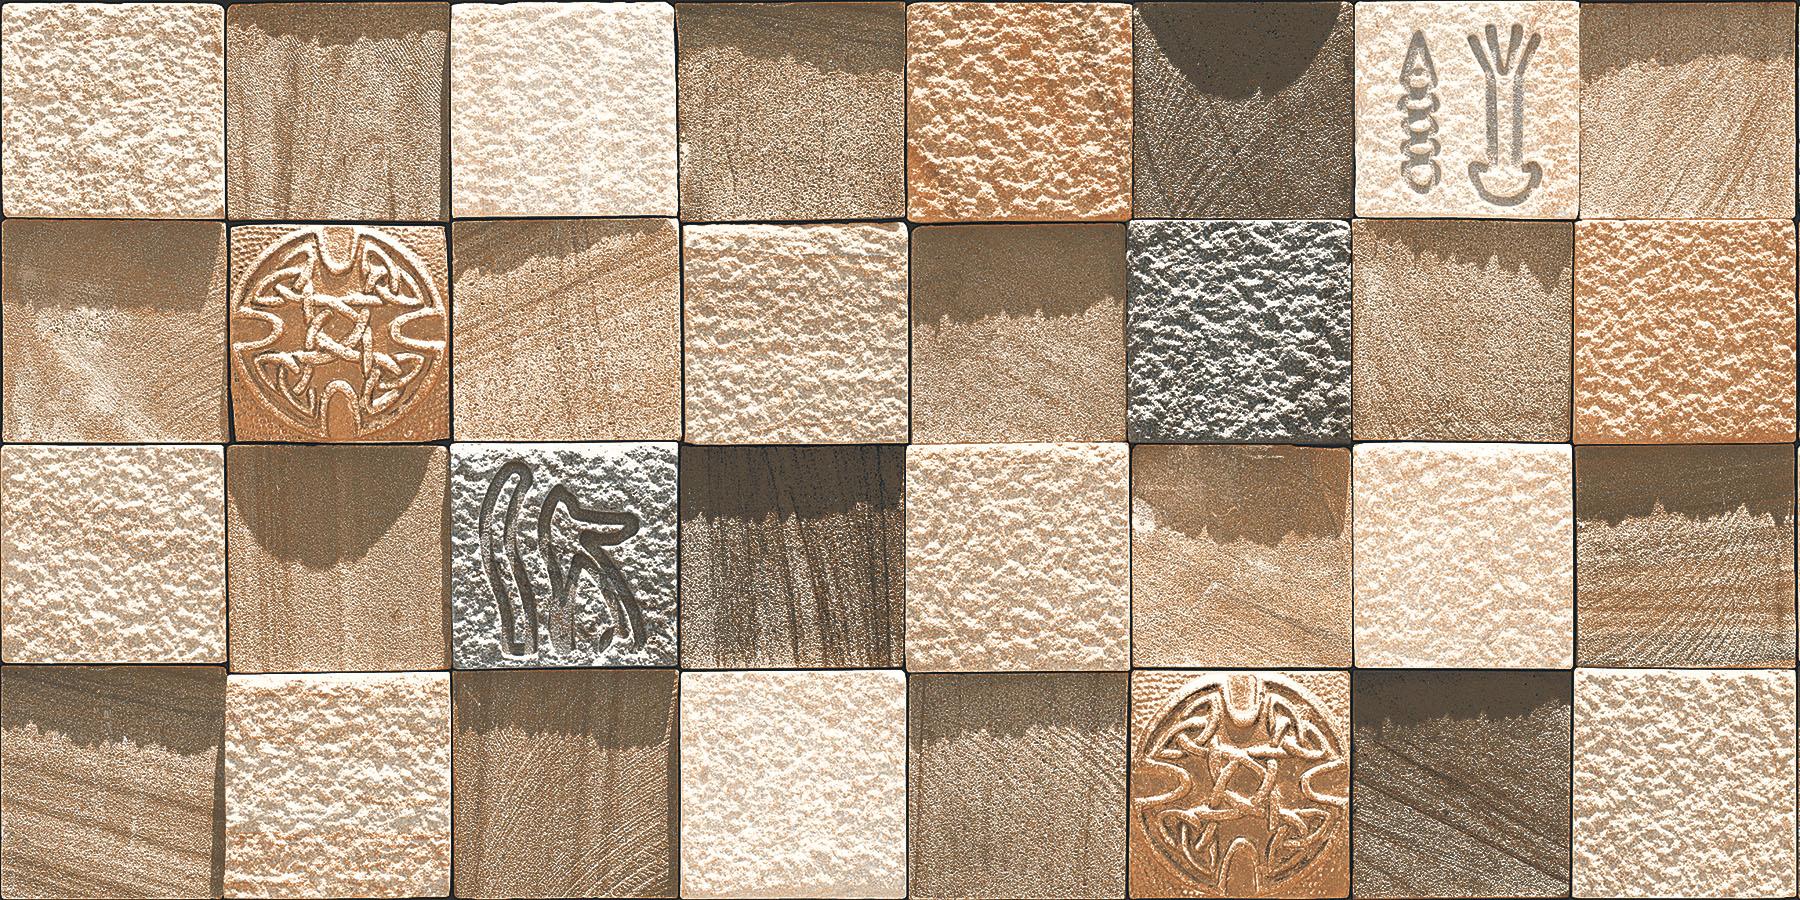 Accent Tiles for Bathroom Tiles, Living Room Tiles, Elevation Tiles, Accent Tiles, Hospital Tiles, Bar/Restaurant, Commercial/Office, Outdoor Area, School & Collages